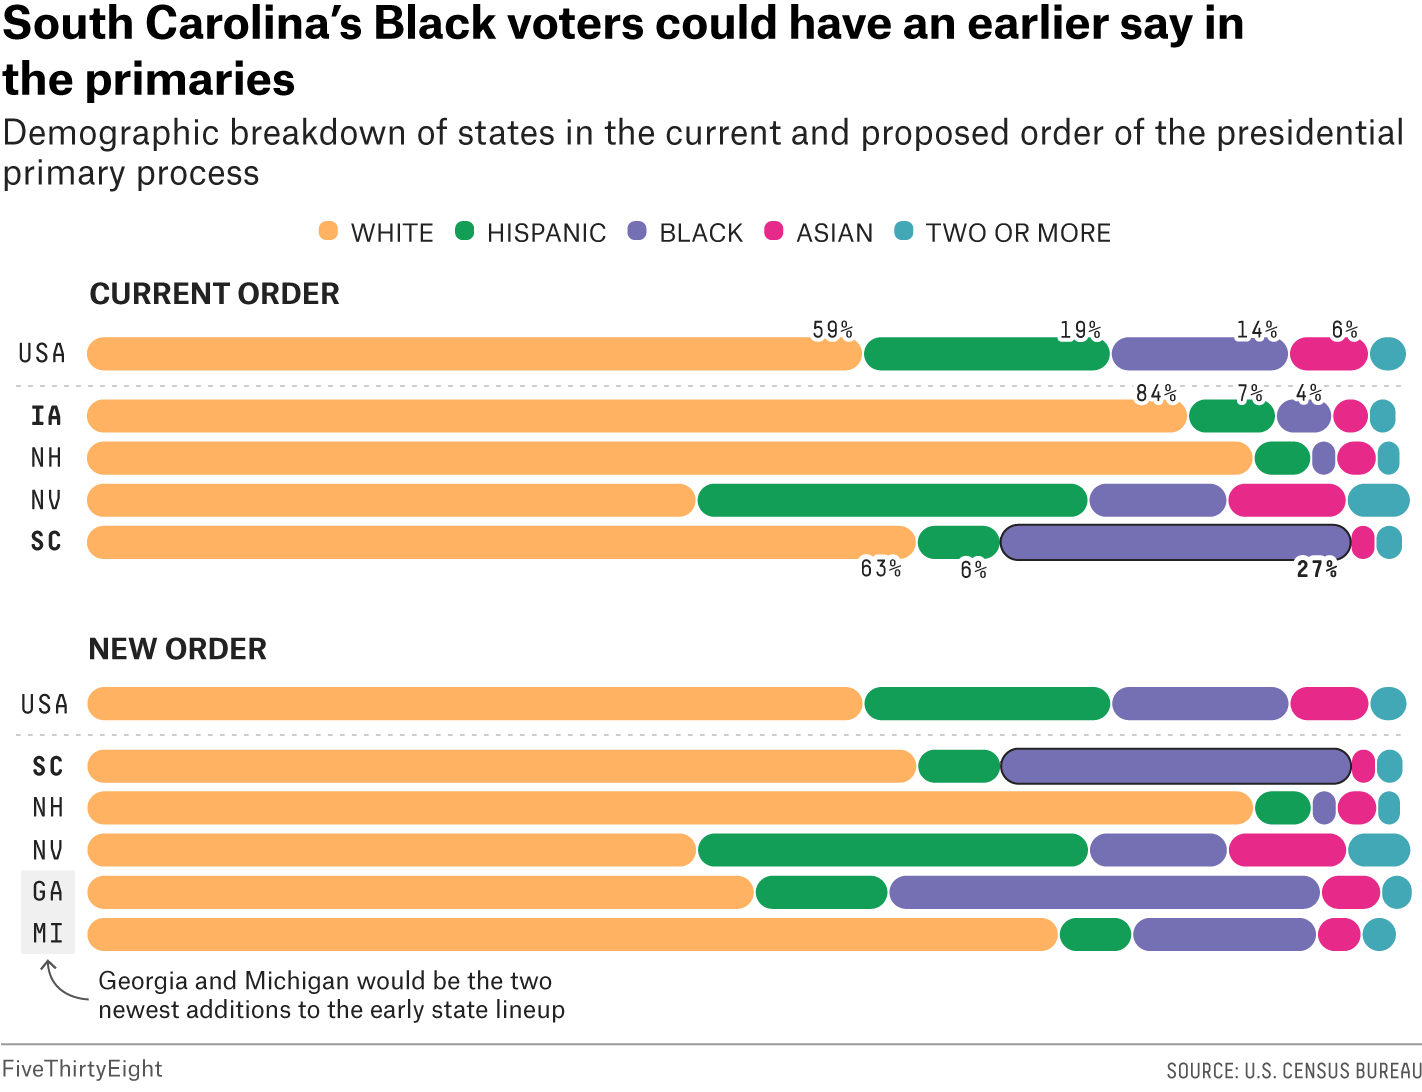 Stacked bar charts showing the demographic breakdown of states in the current and proposed order of the presidential primary process. Even though the U.S. has a Black population of 14%, Iowa, the leadoff in the current calendar, has a share of 4%. Making South Carolina as the leadoff in the proposed order will give its larger share of Black voters – 27% -- an earlier say in the primaries.